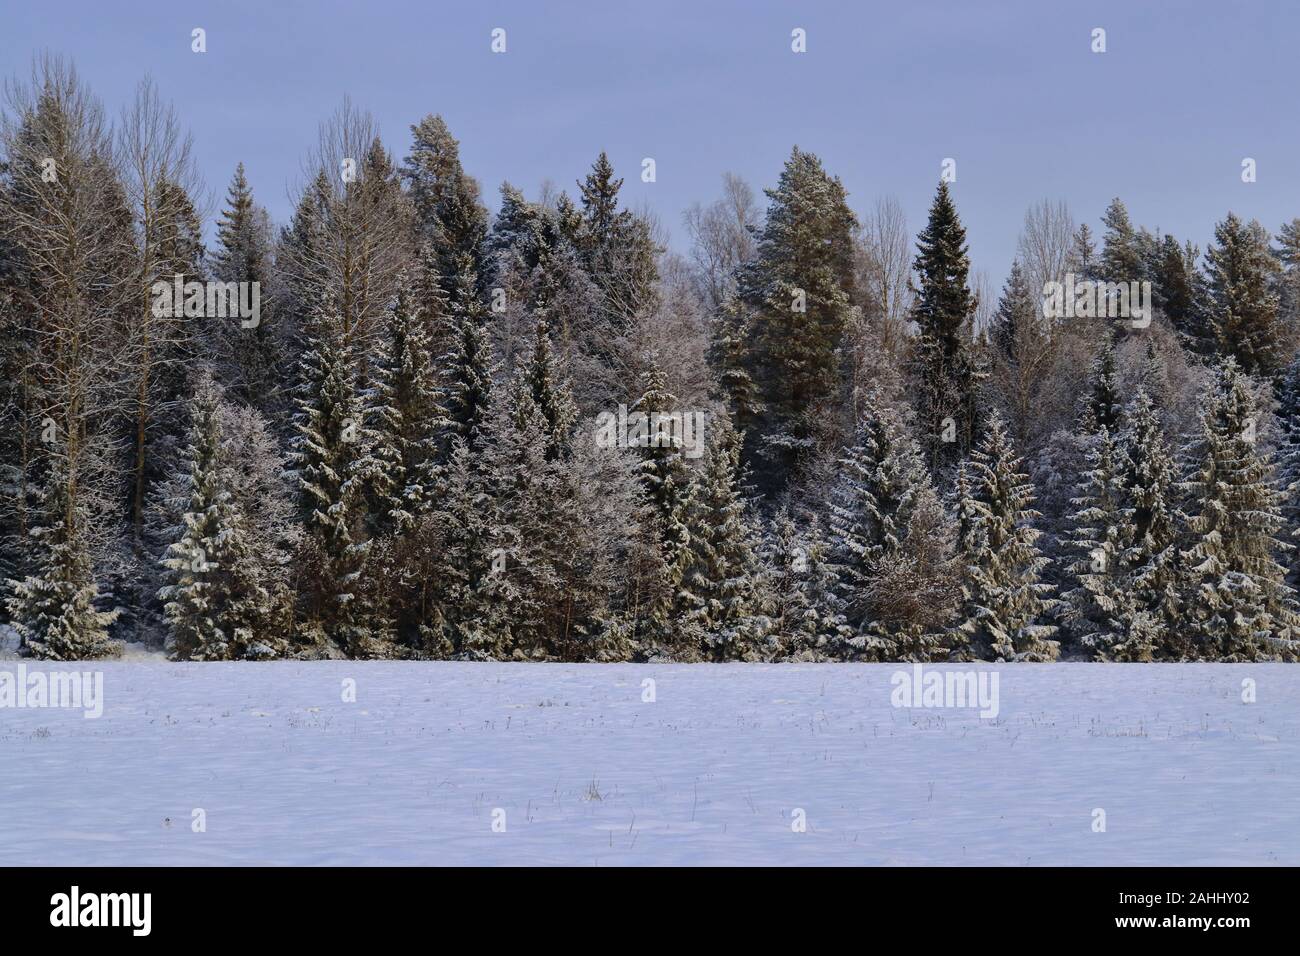 Snow covered spruce forest. In foreground snow covered field. Stock Photo